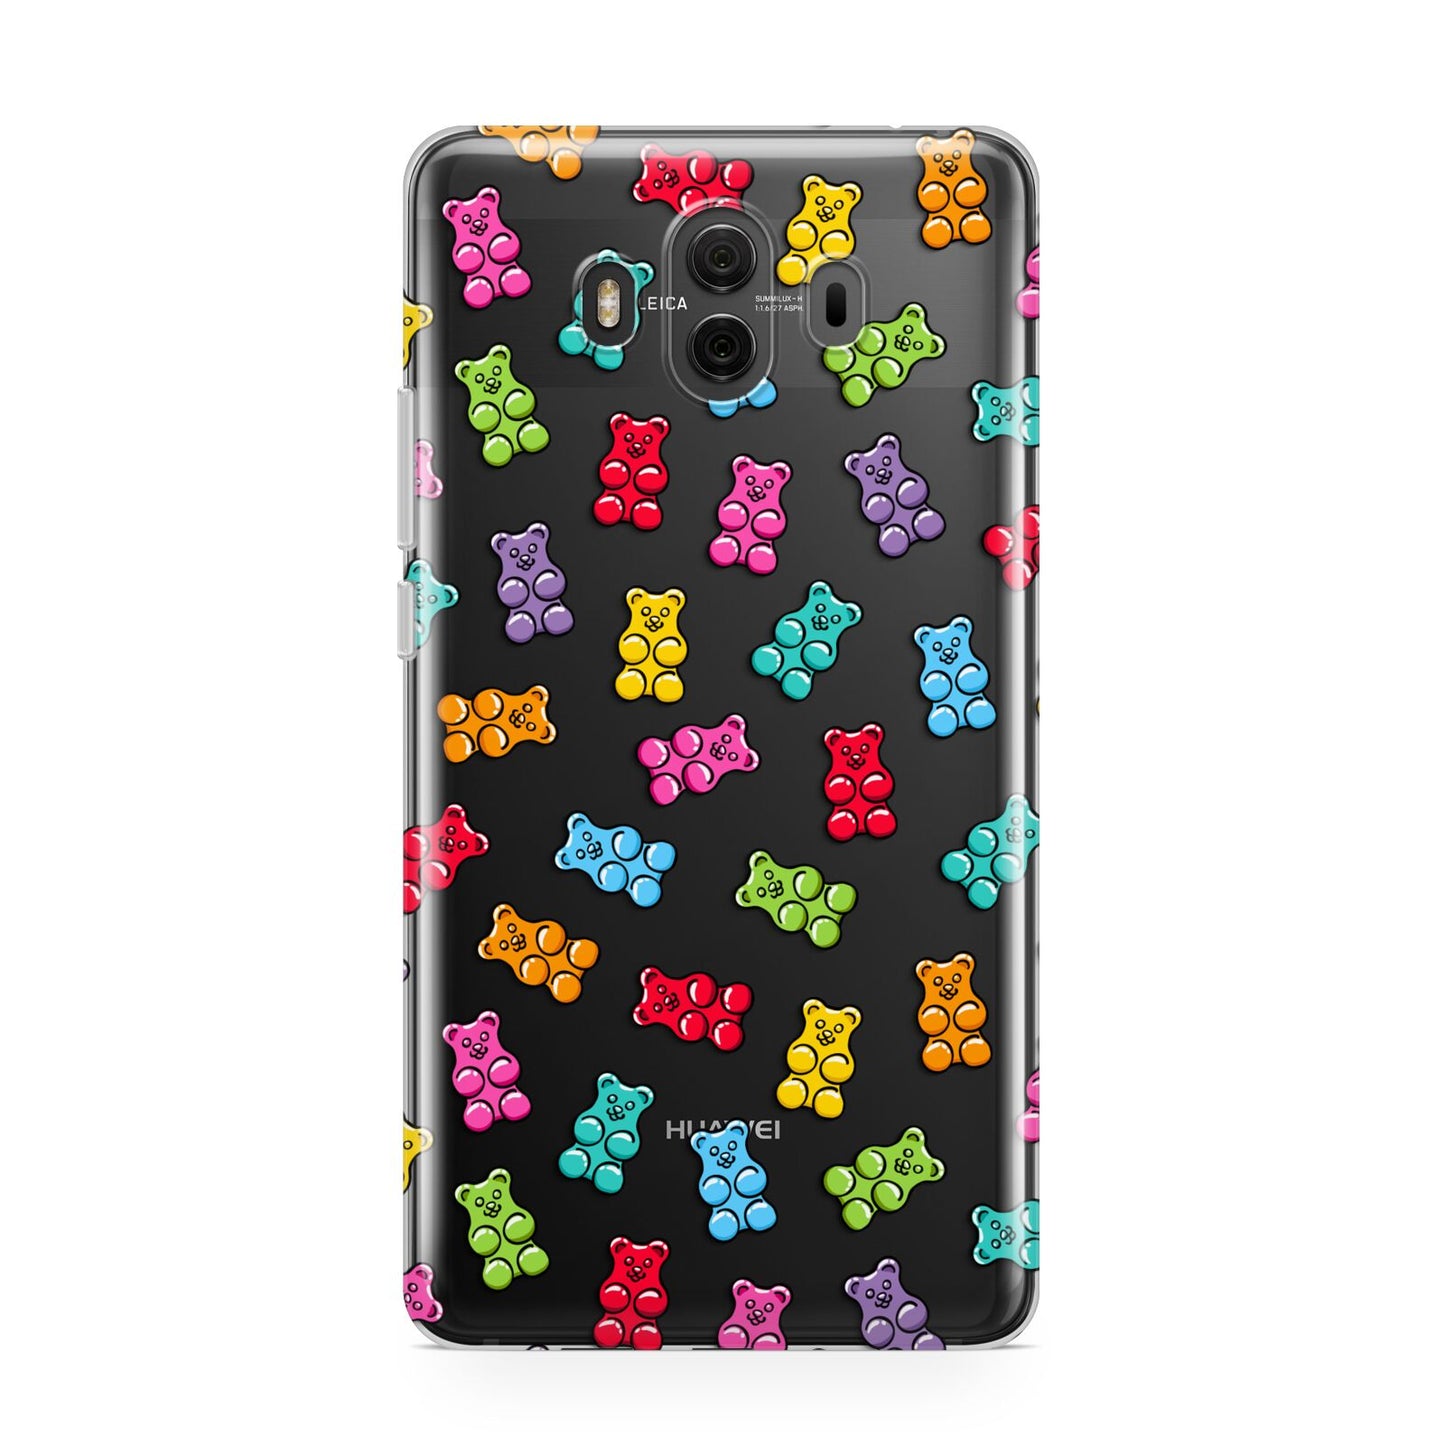 Gummy Bear Huawei Mate 10 Protective Phone Case